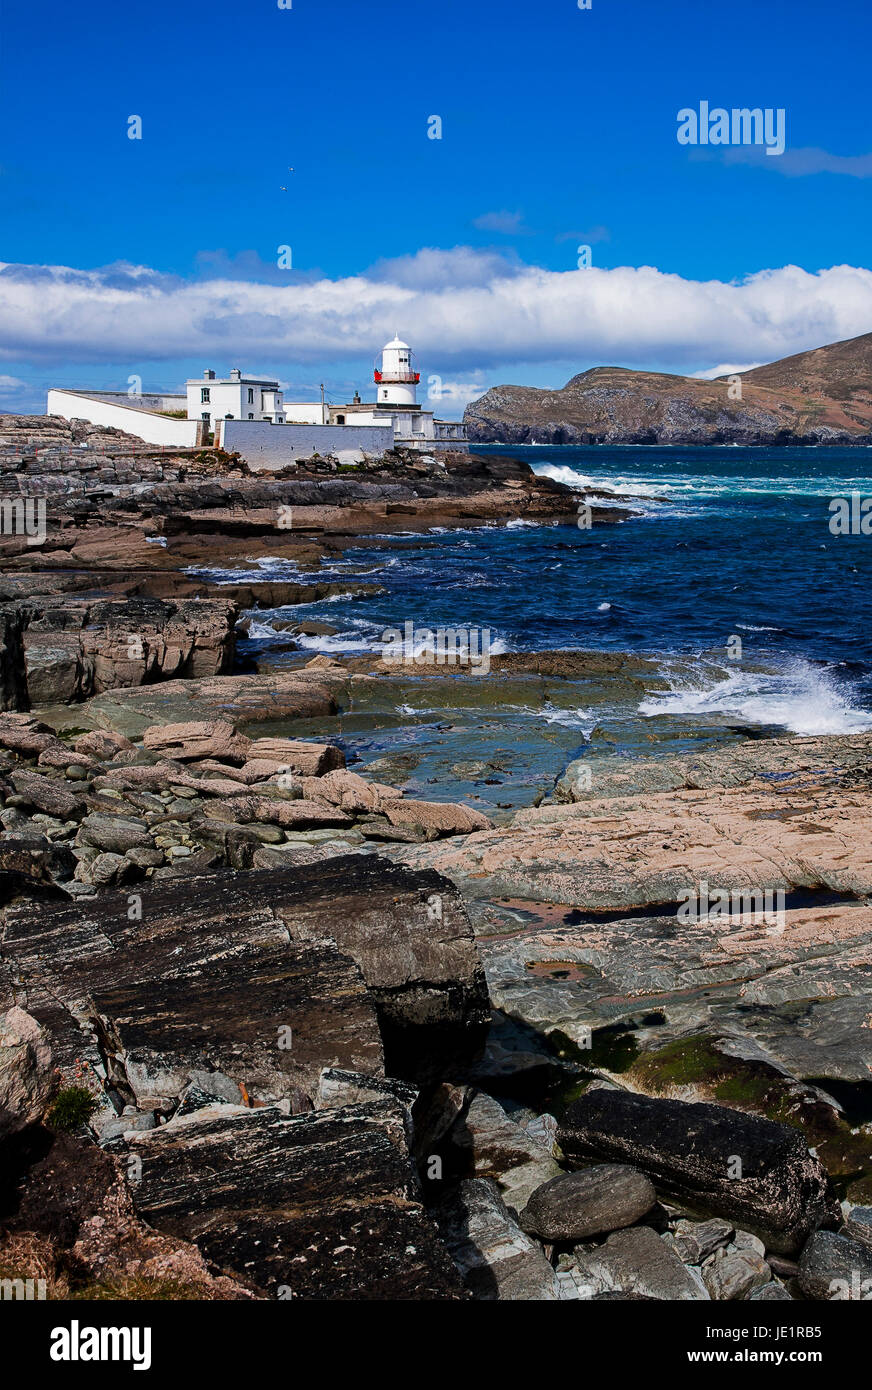 A Photo of Valentia Lighthouse from the Rocks, Taken on a Low tide, in Co Kerry, Ireland Stock Photo